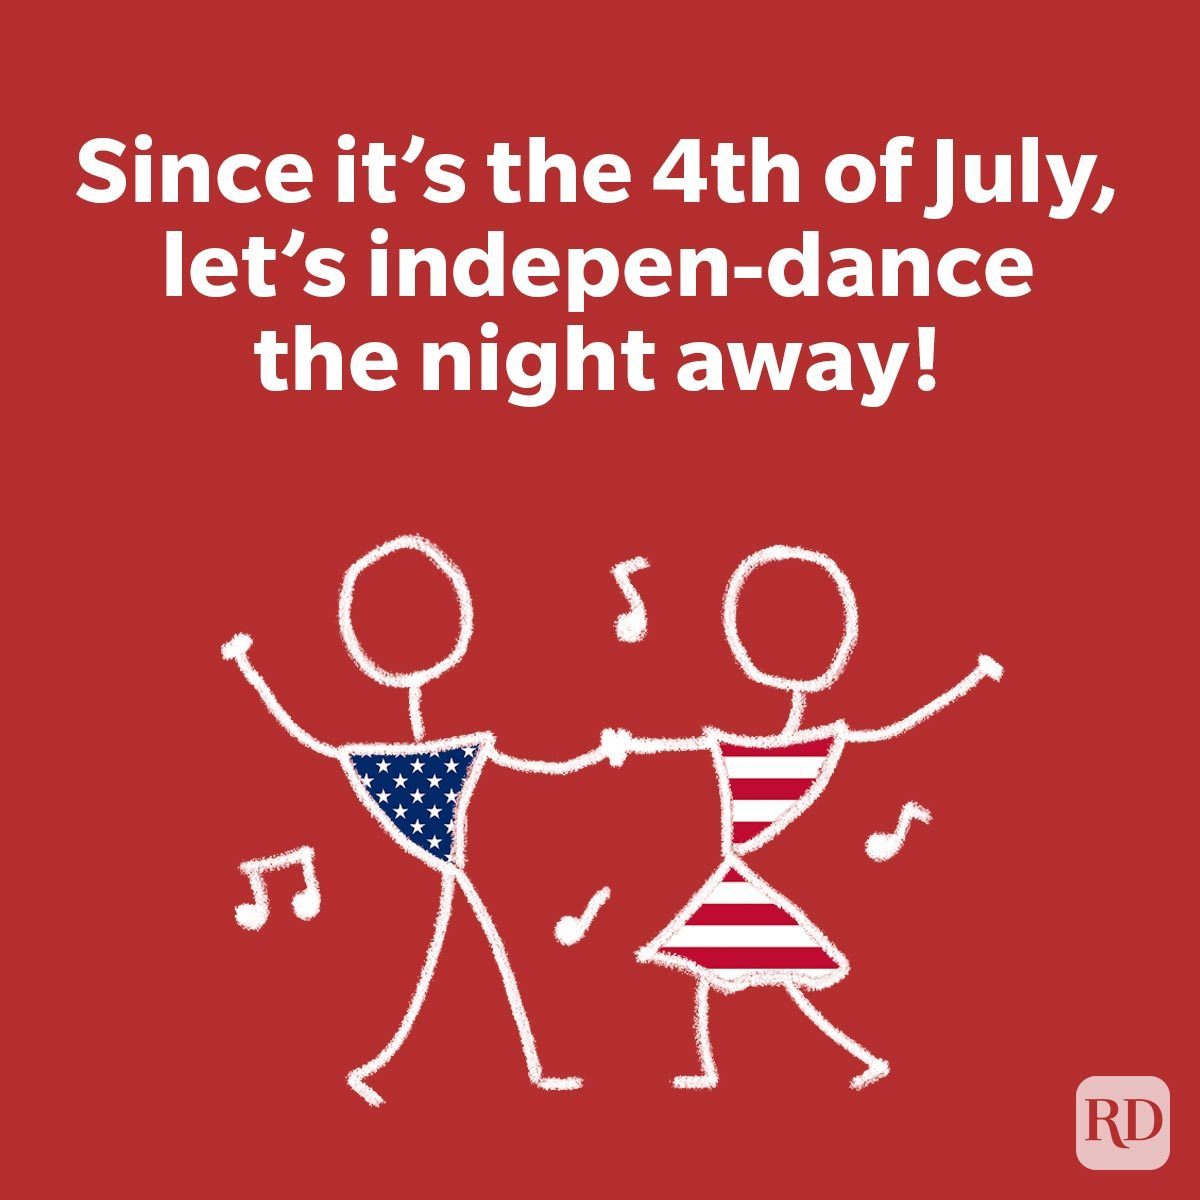 Jokes For July 4th That Let Laughter Ring dancing man and woman doodle American Stars and Stripes flag on red background